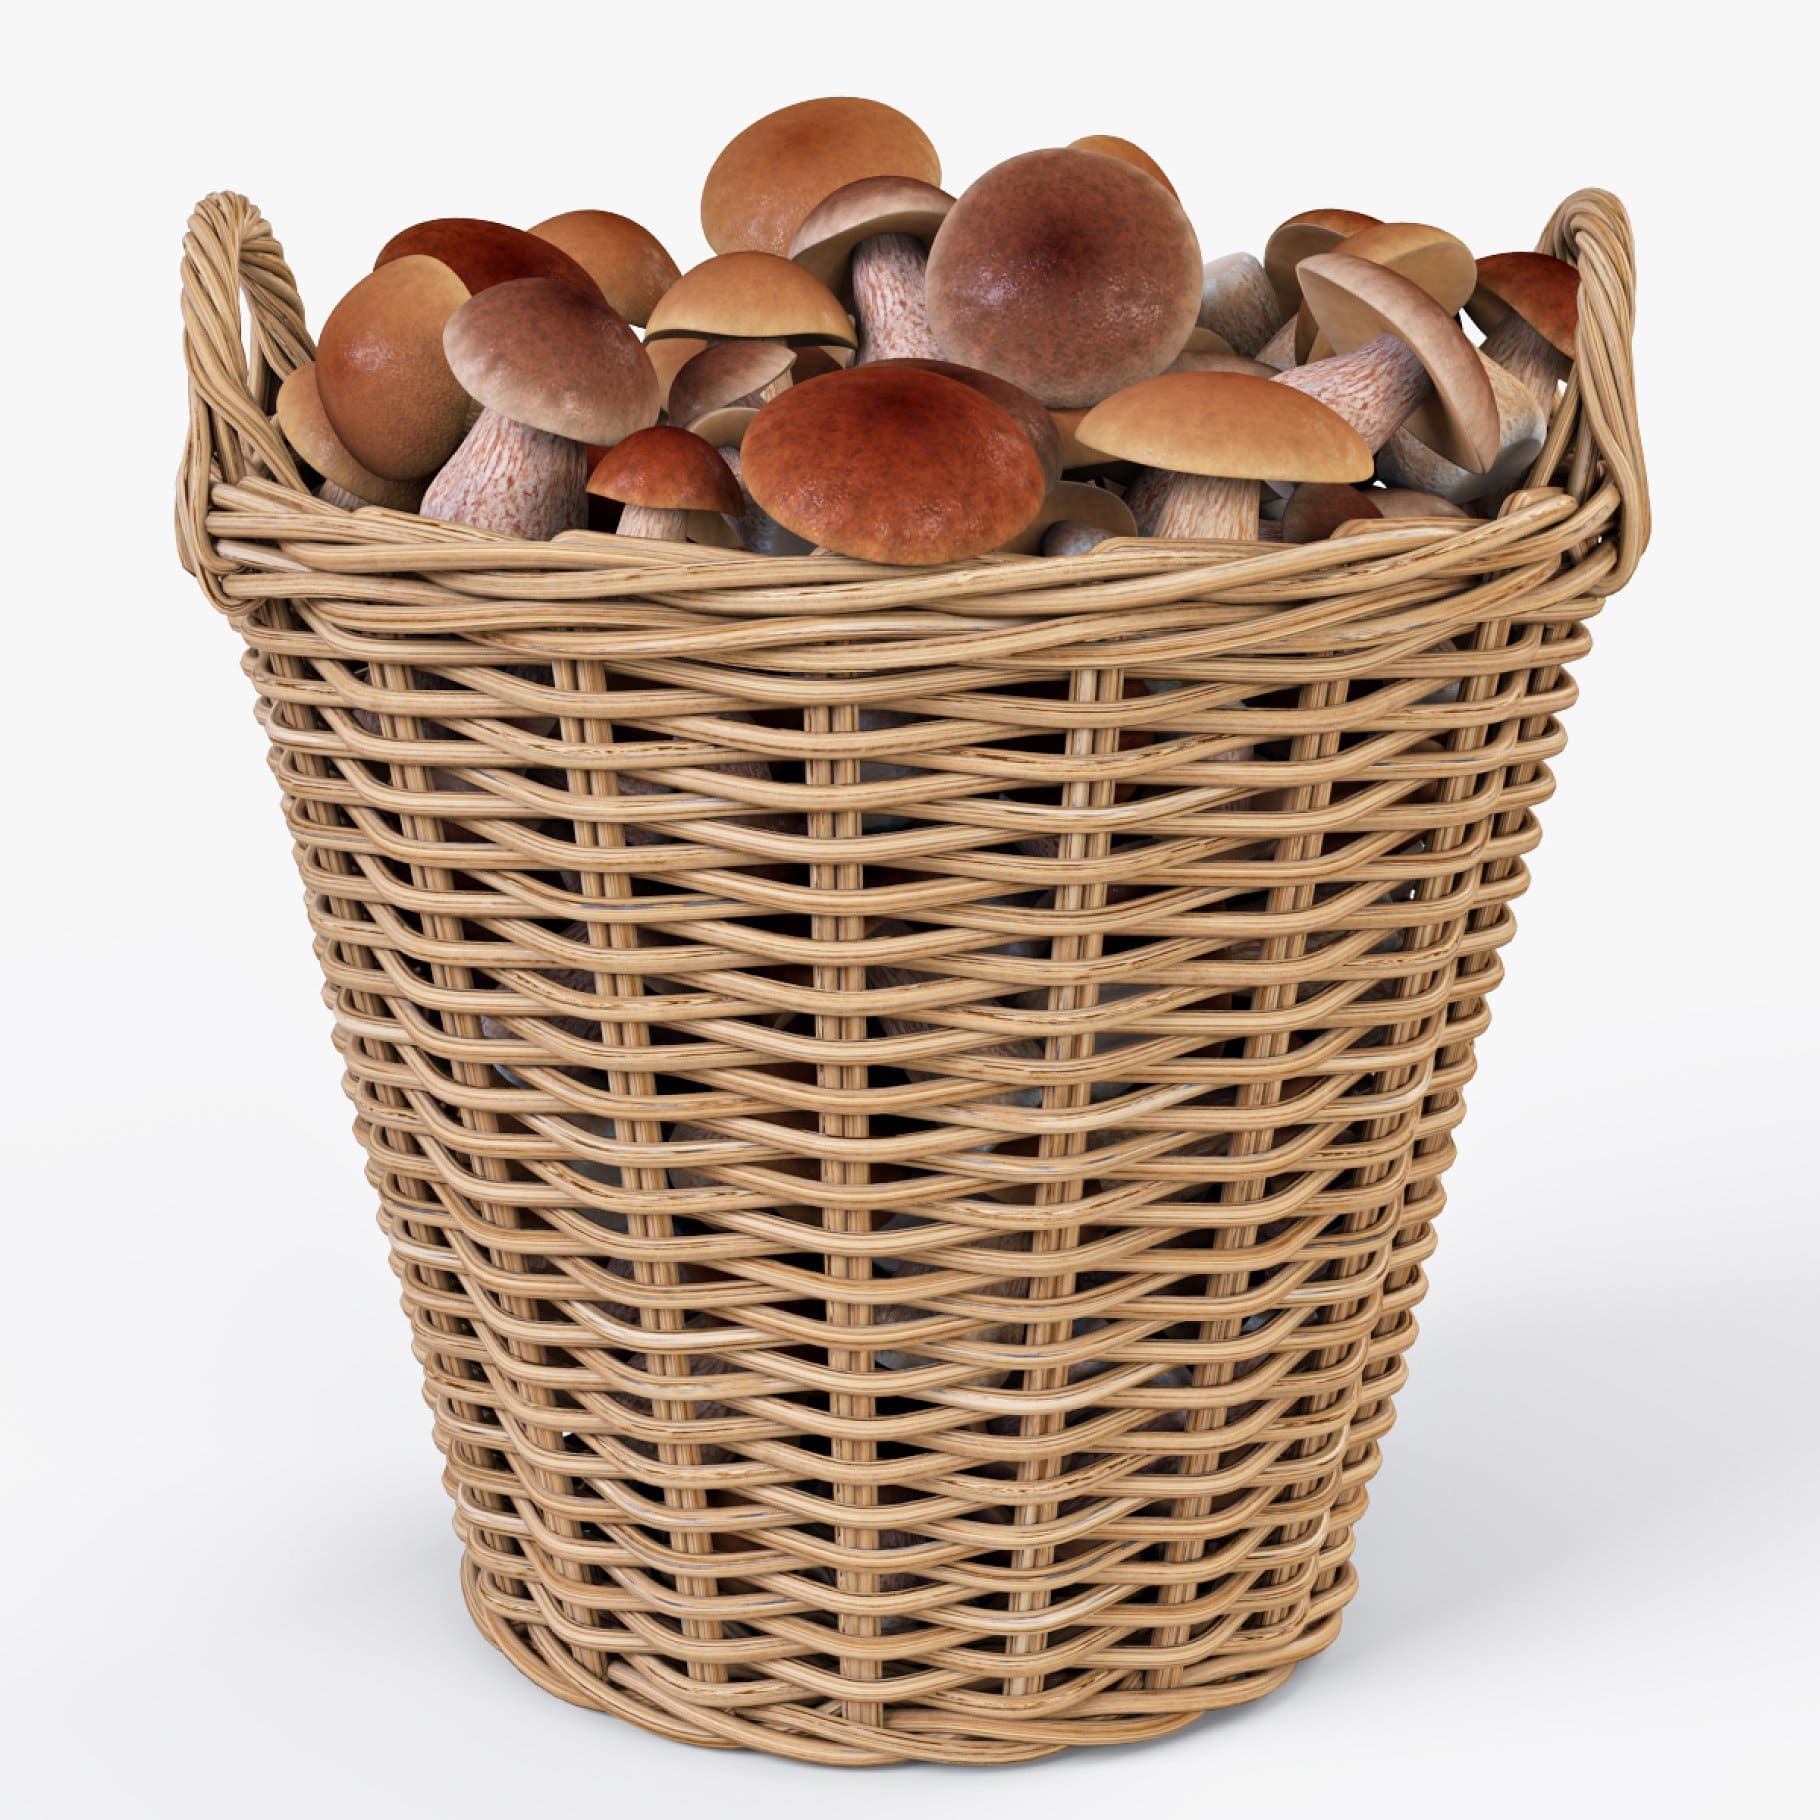 A basket with mushrooms from a light vine.